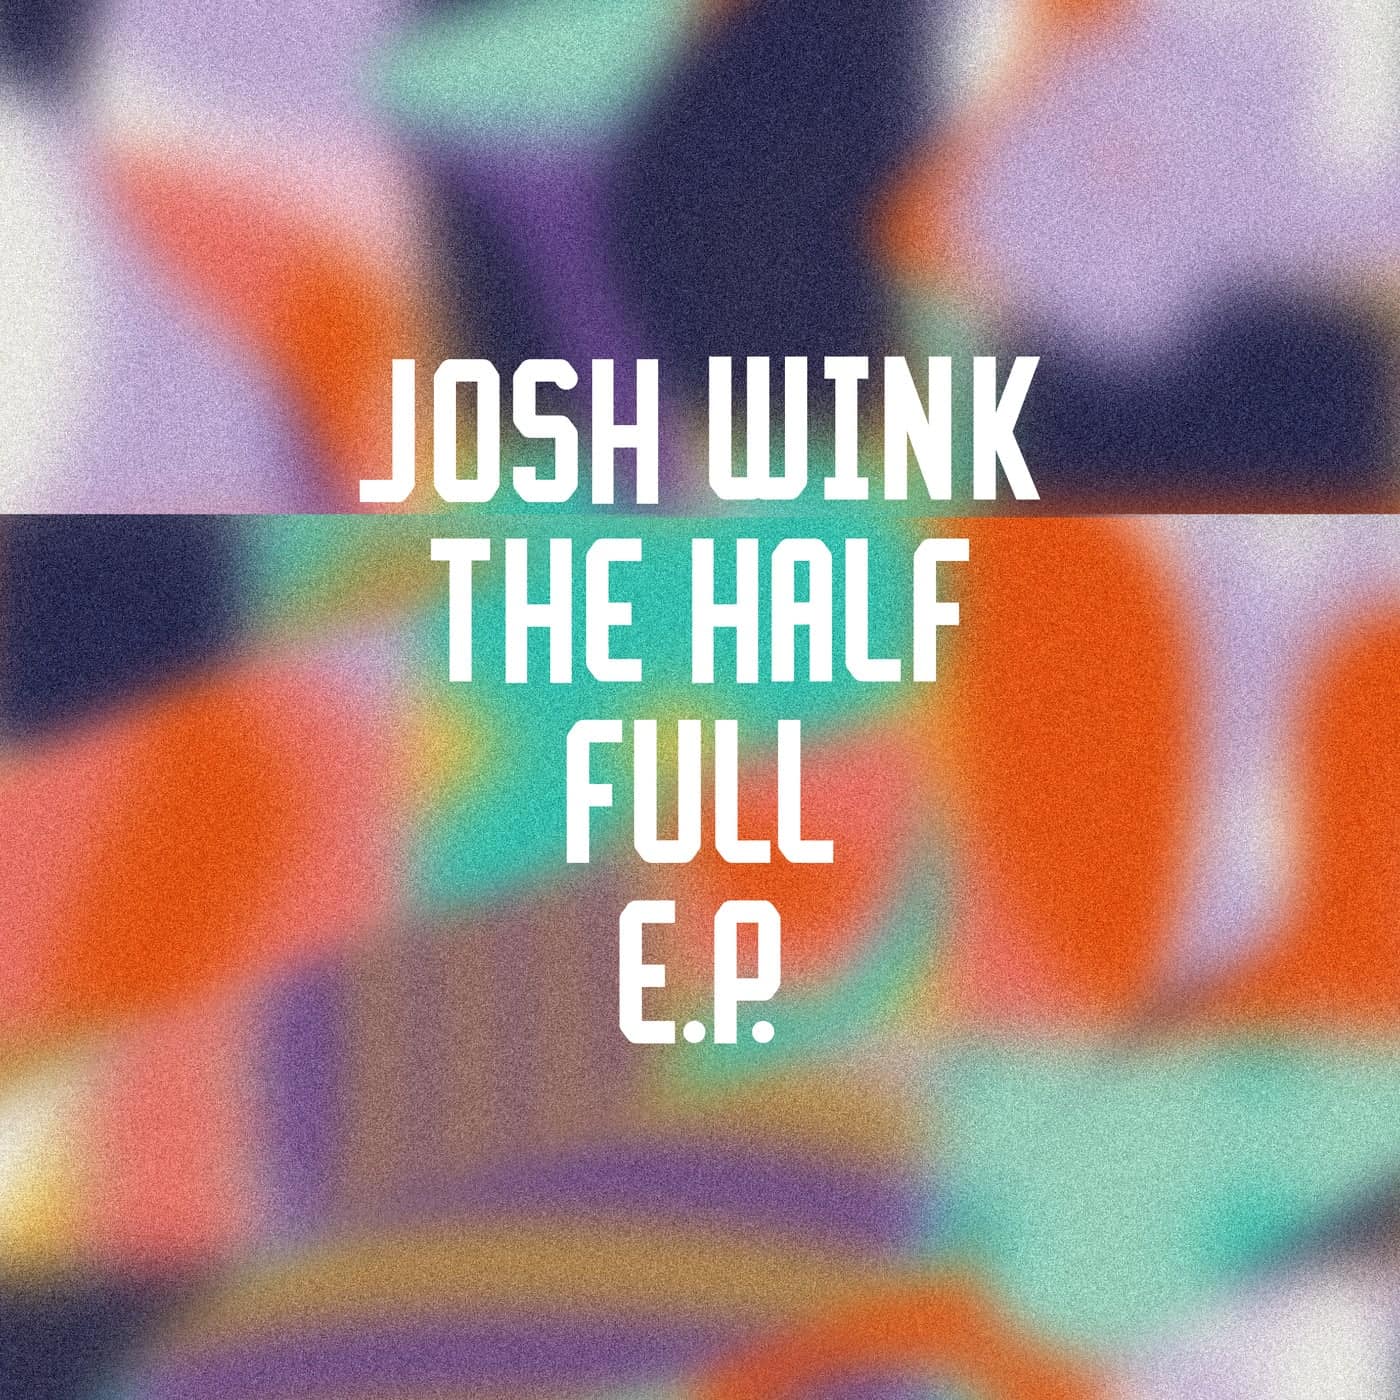 Download Josh Wink - The Half Full EP on Electrobuzz